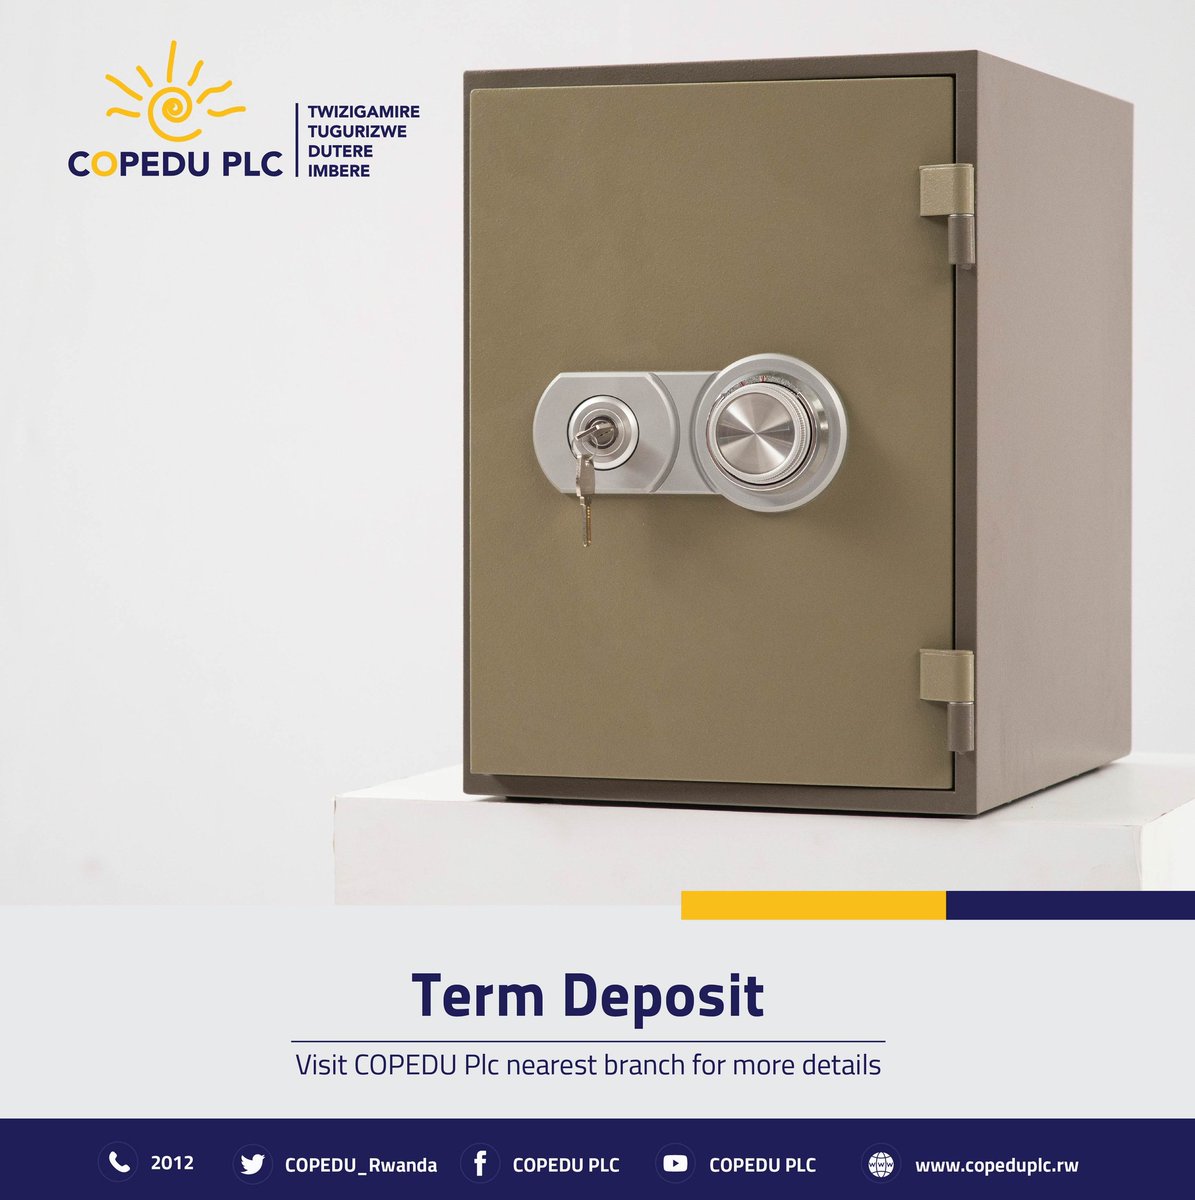 Open Term Deposit Account at Copedu Plc and benefits preferable interest rate.Visit our nearest branch or call 2012 for more
information.
#SavingsWeek2023
#WSW2023